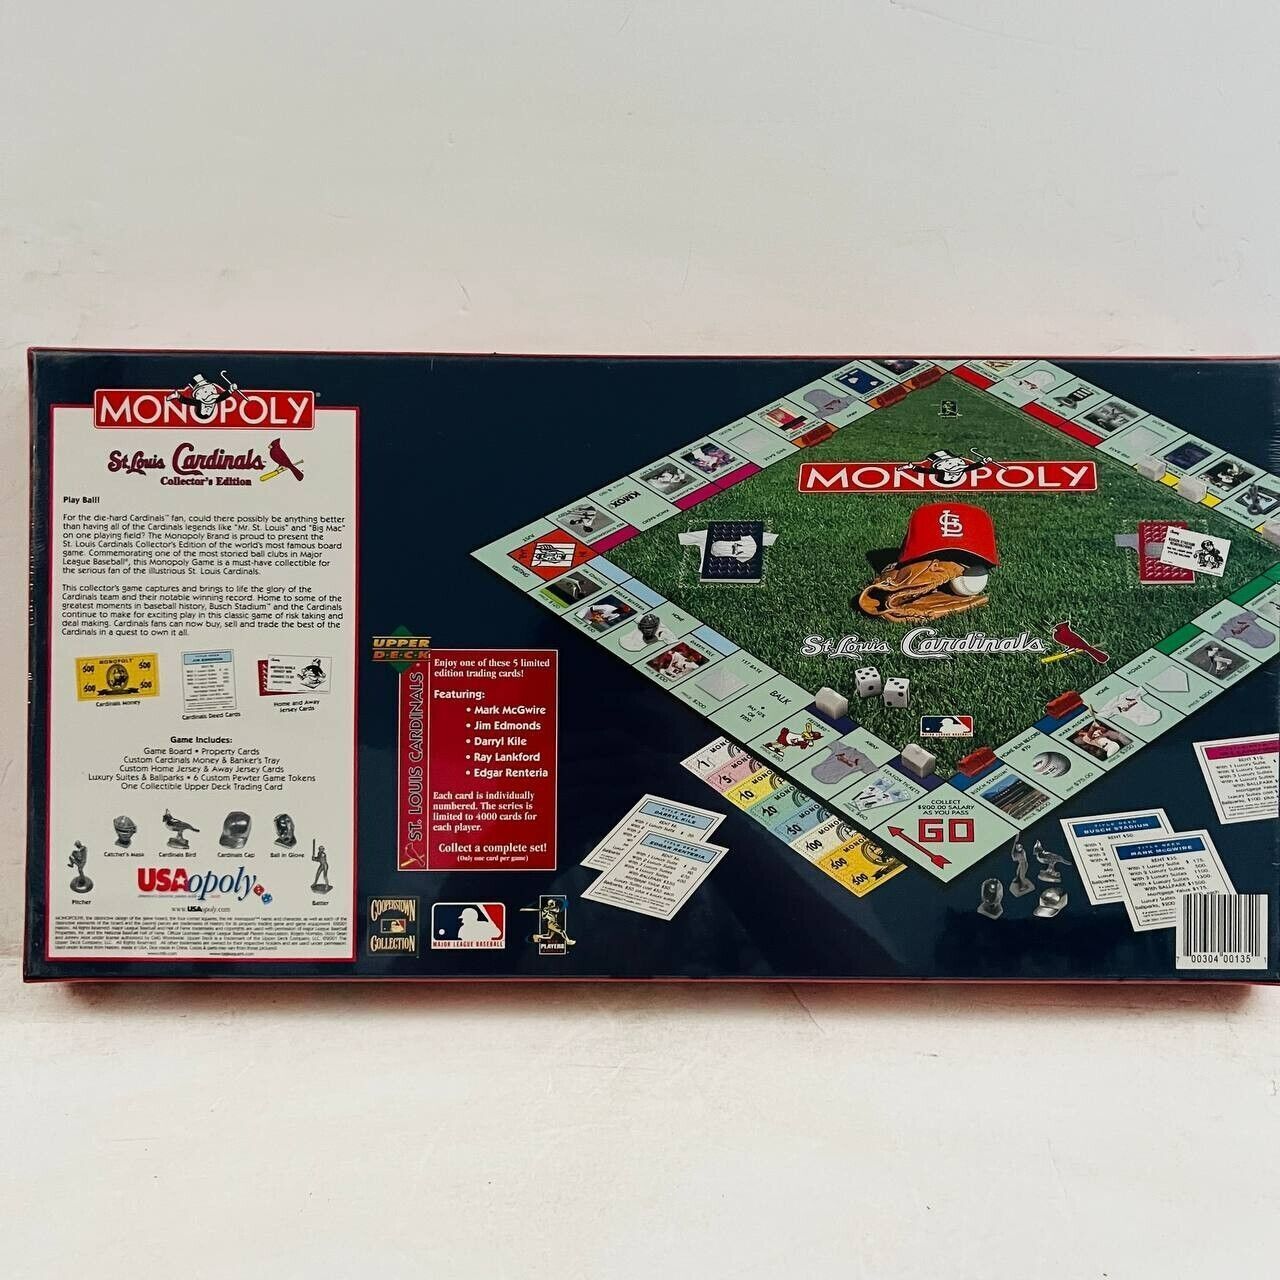 St. Louis Cardinals Collector's Edition Monopoly for Sale in Saint